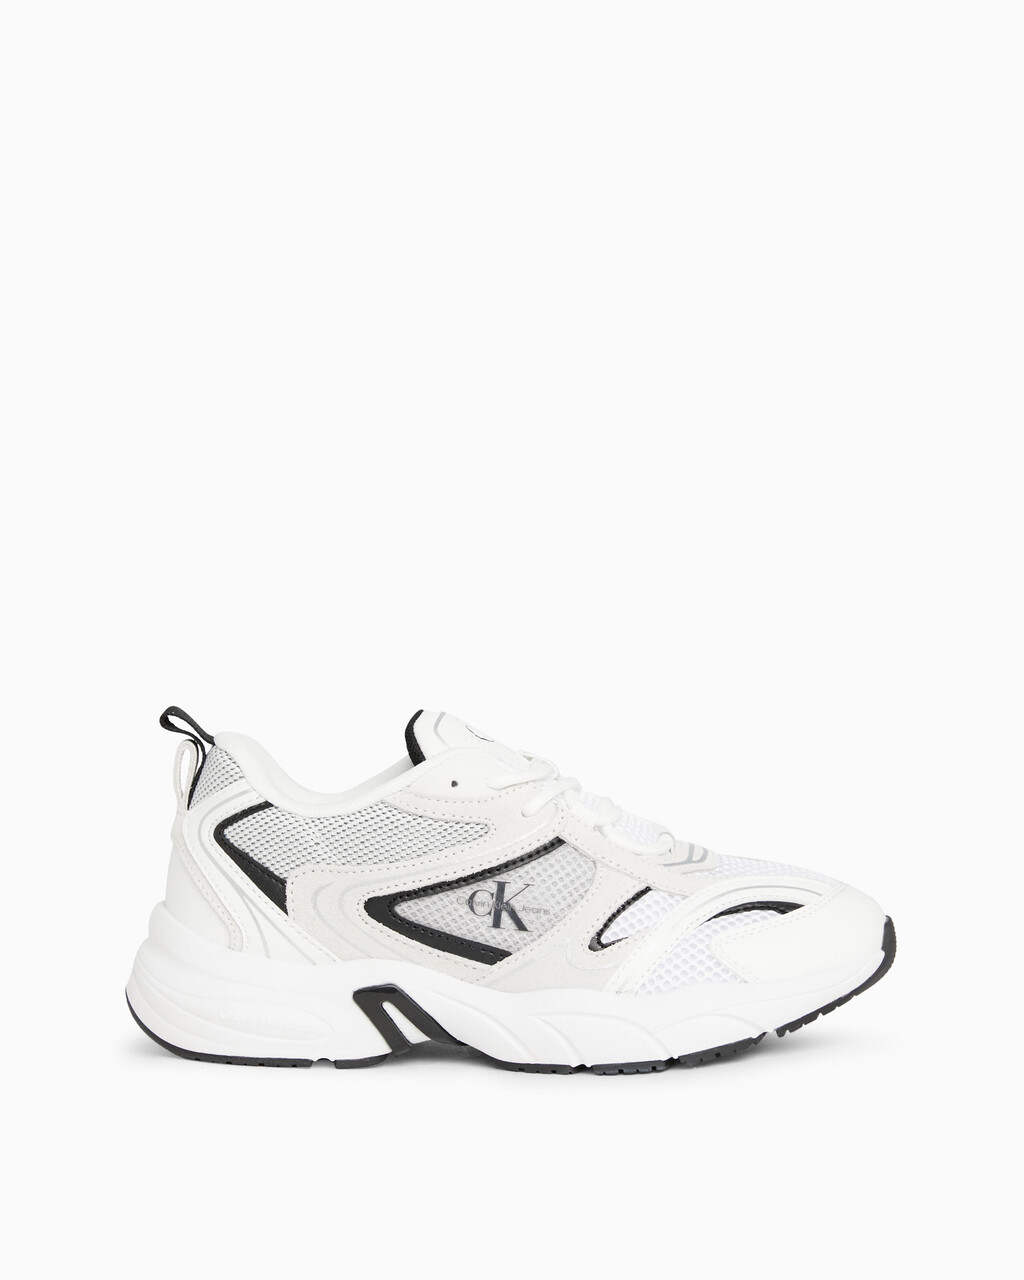 Leather Sneakers, Bright White/Black, hi-res